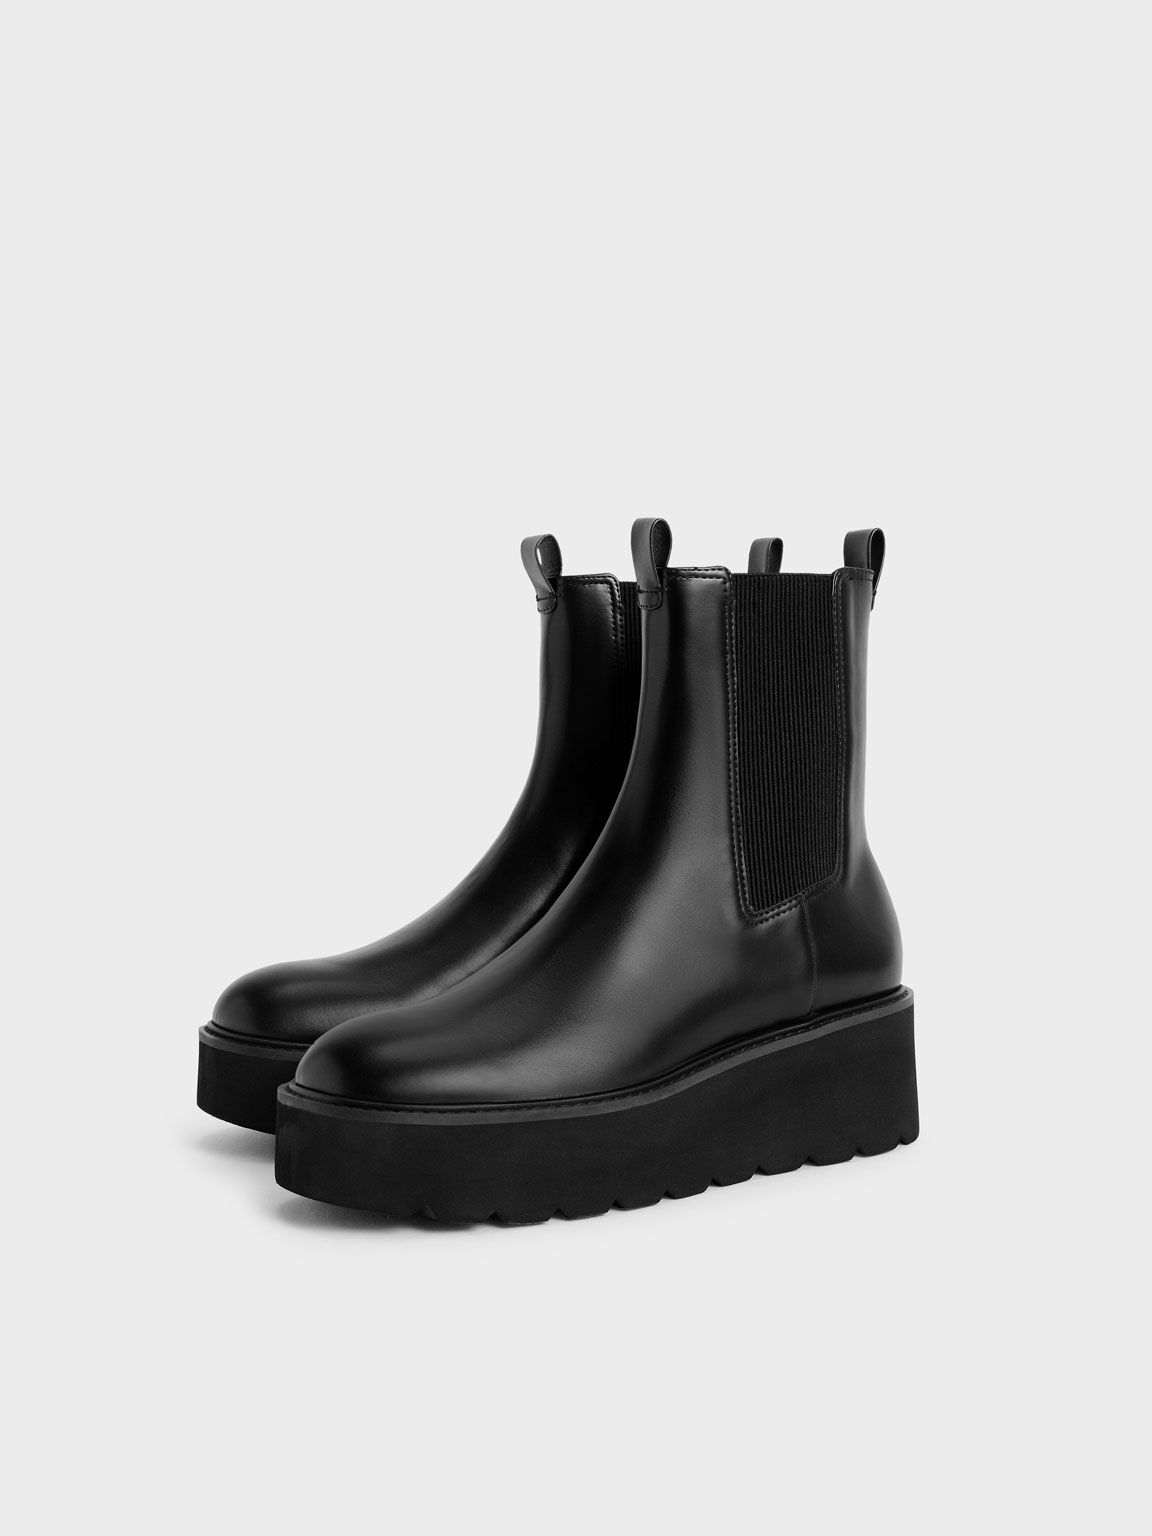 Black Double Tab Platform Chelsea Boots - CHARLES & KEITH US